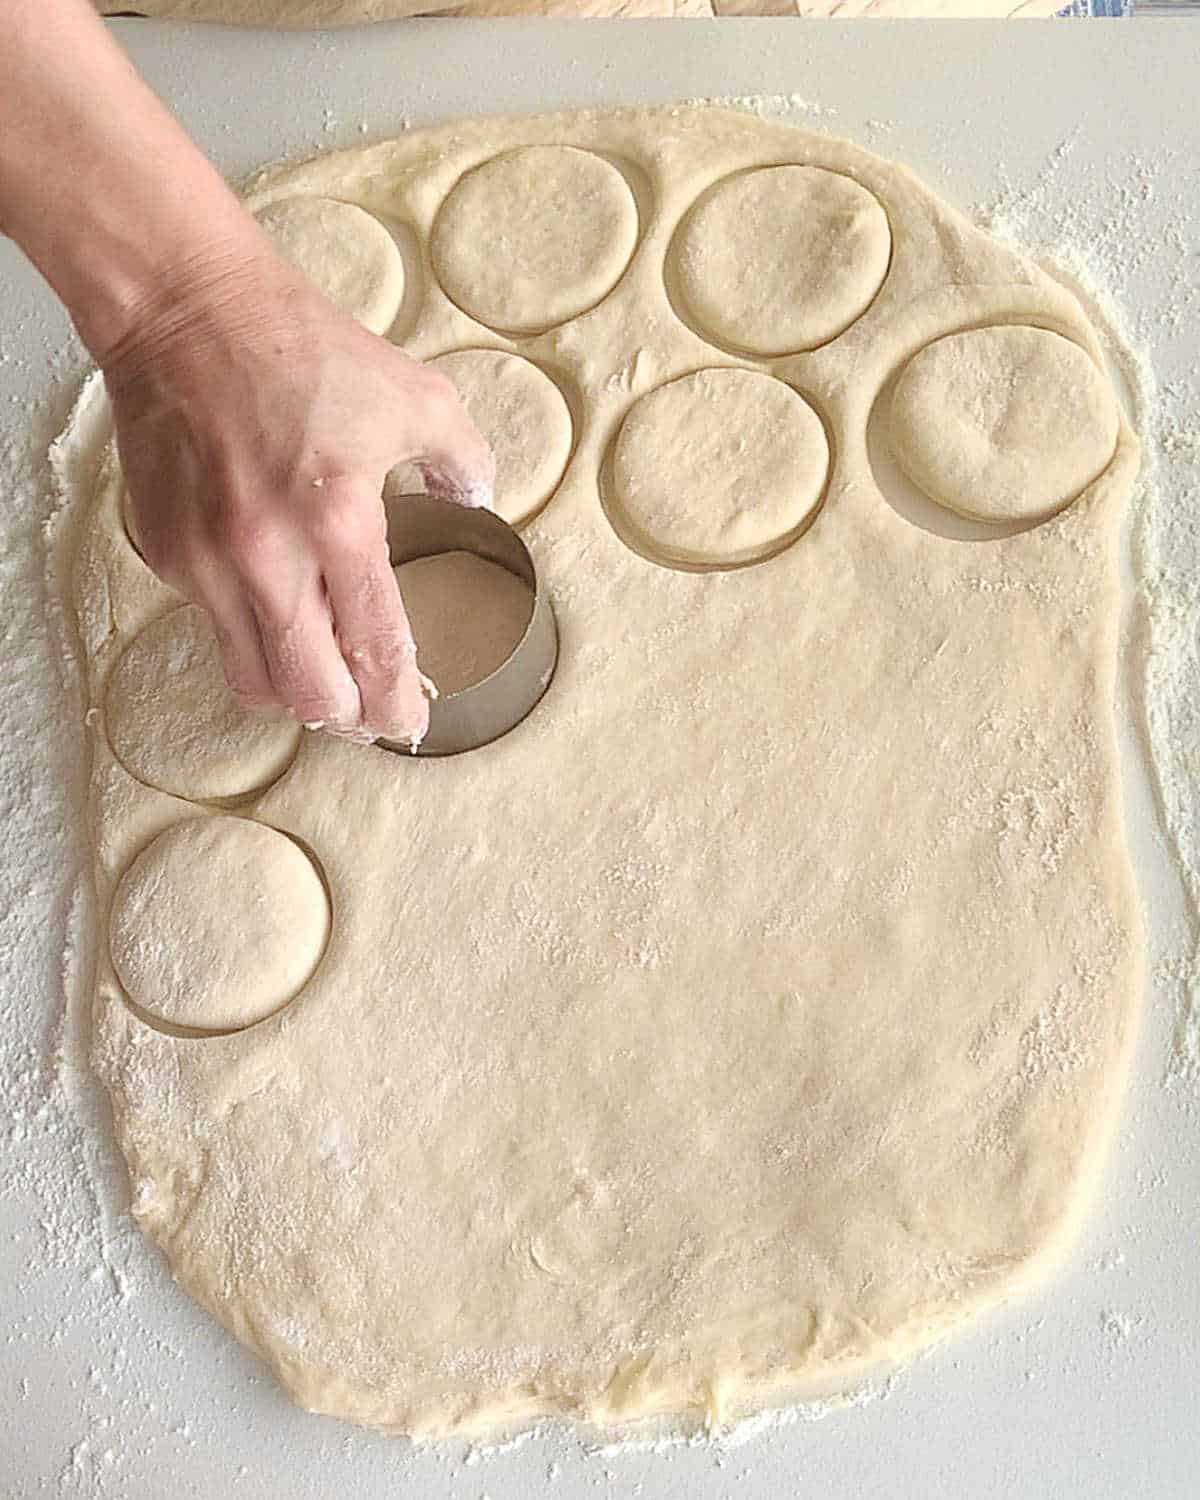 Rolled bread dough and hand cutting rounds with a cookie cutter.